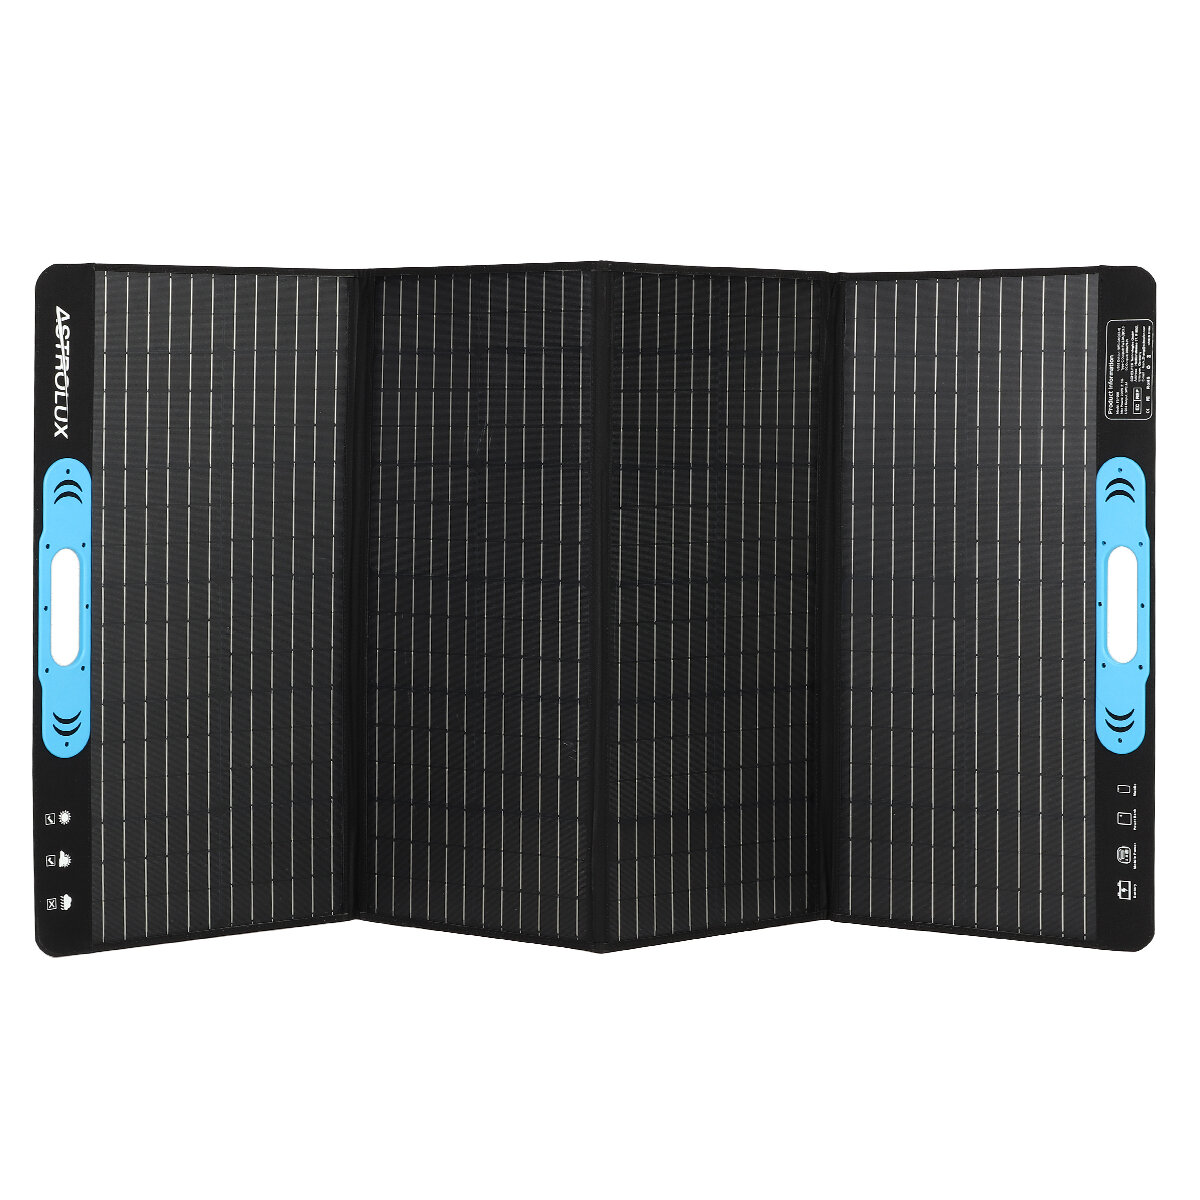 Astrolux® FSP200 18V 200W Foldable Solar Panel Portable Solar Battery Charger With USB DC Multi-Contact 4 Multi-Output for Power Station Tablet Phones Flashlight Camping Van RV